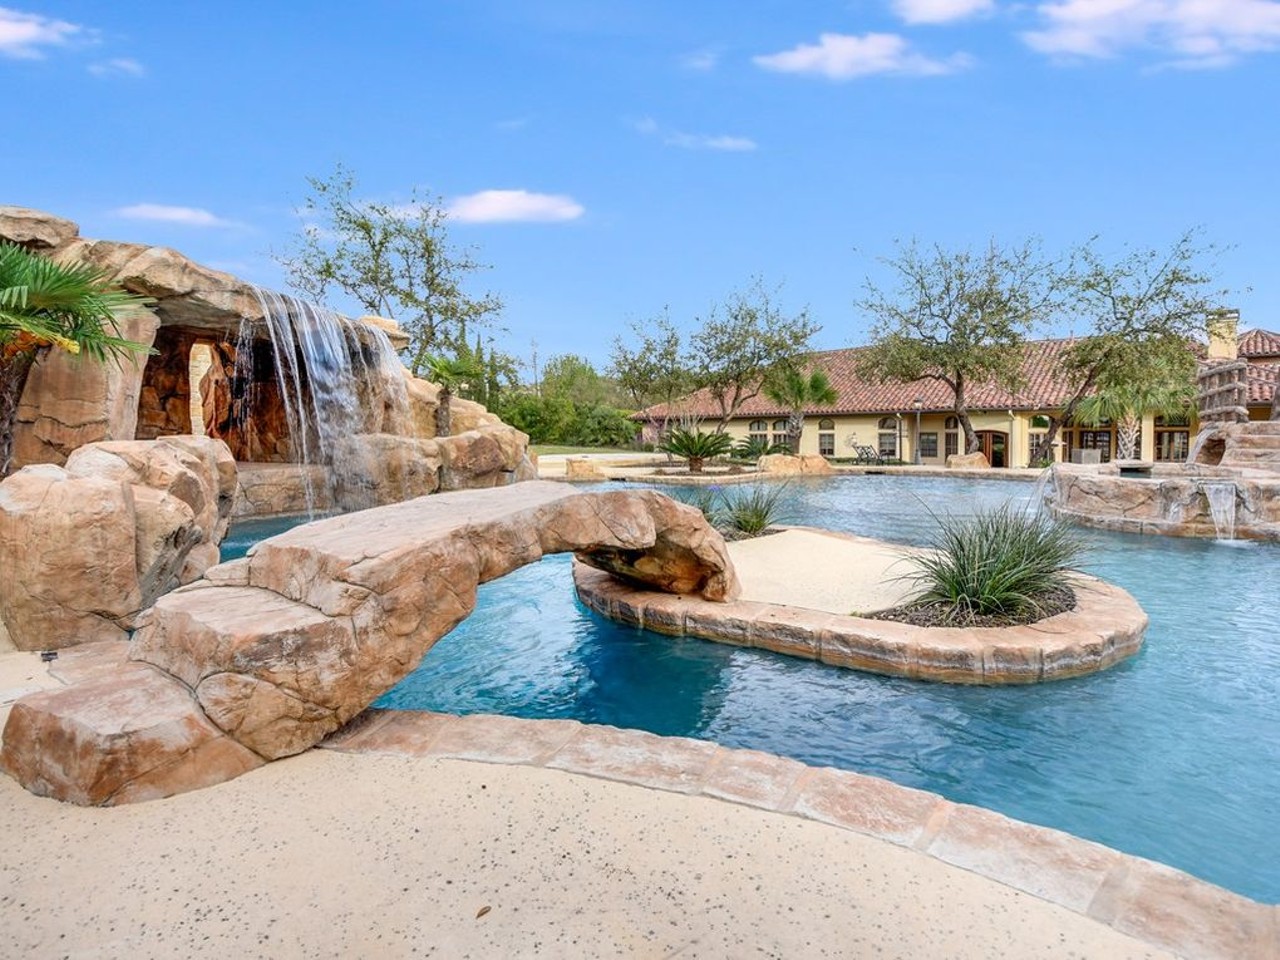 A San Antonio Doctor, not a Spur, Is Selling This $2.5 Million Mansion With an Indoor Basketball Court